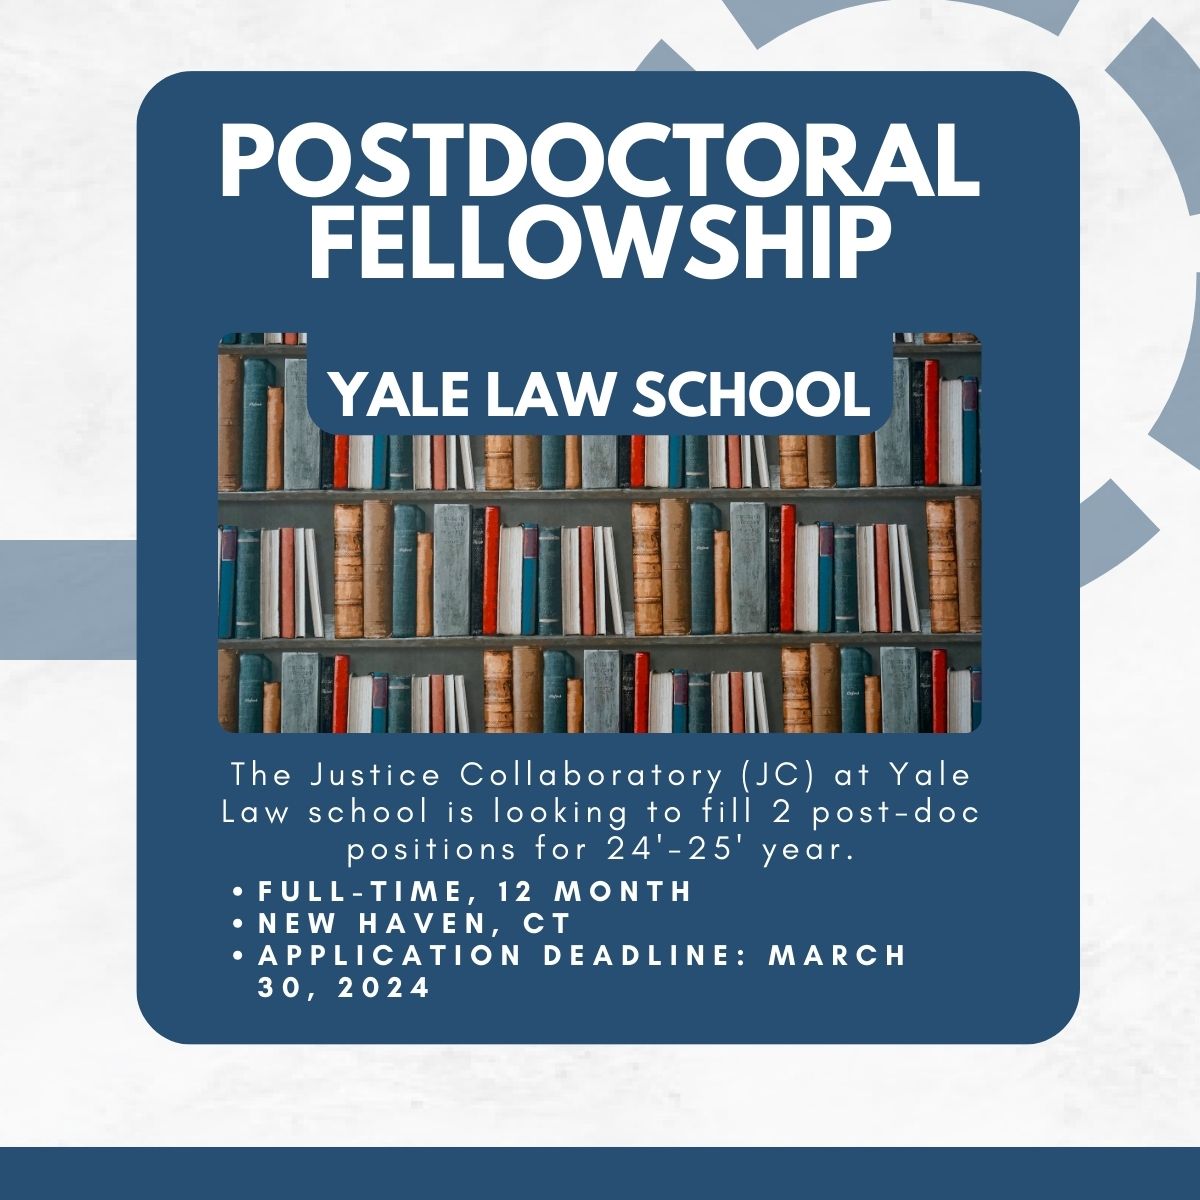 POSTDOC FELLOWSHIP OPPORTUNITY! The Justice Collaboratory (JC) at Yale Law School is looking to fill two postdoctoral positions for the '24-'25 academic year. The Application deadline is March 30th, 2024. See linktr.ee/apls_sc for more details!